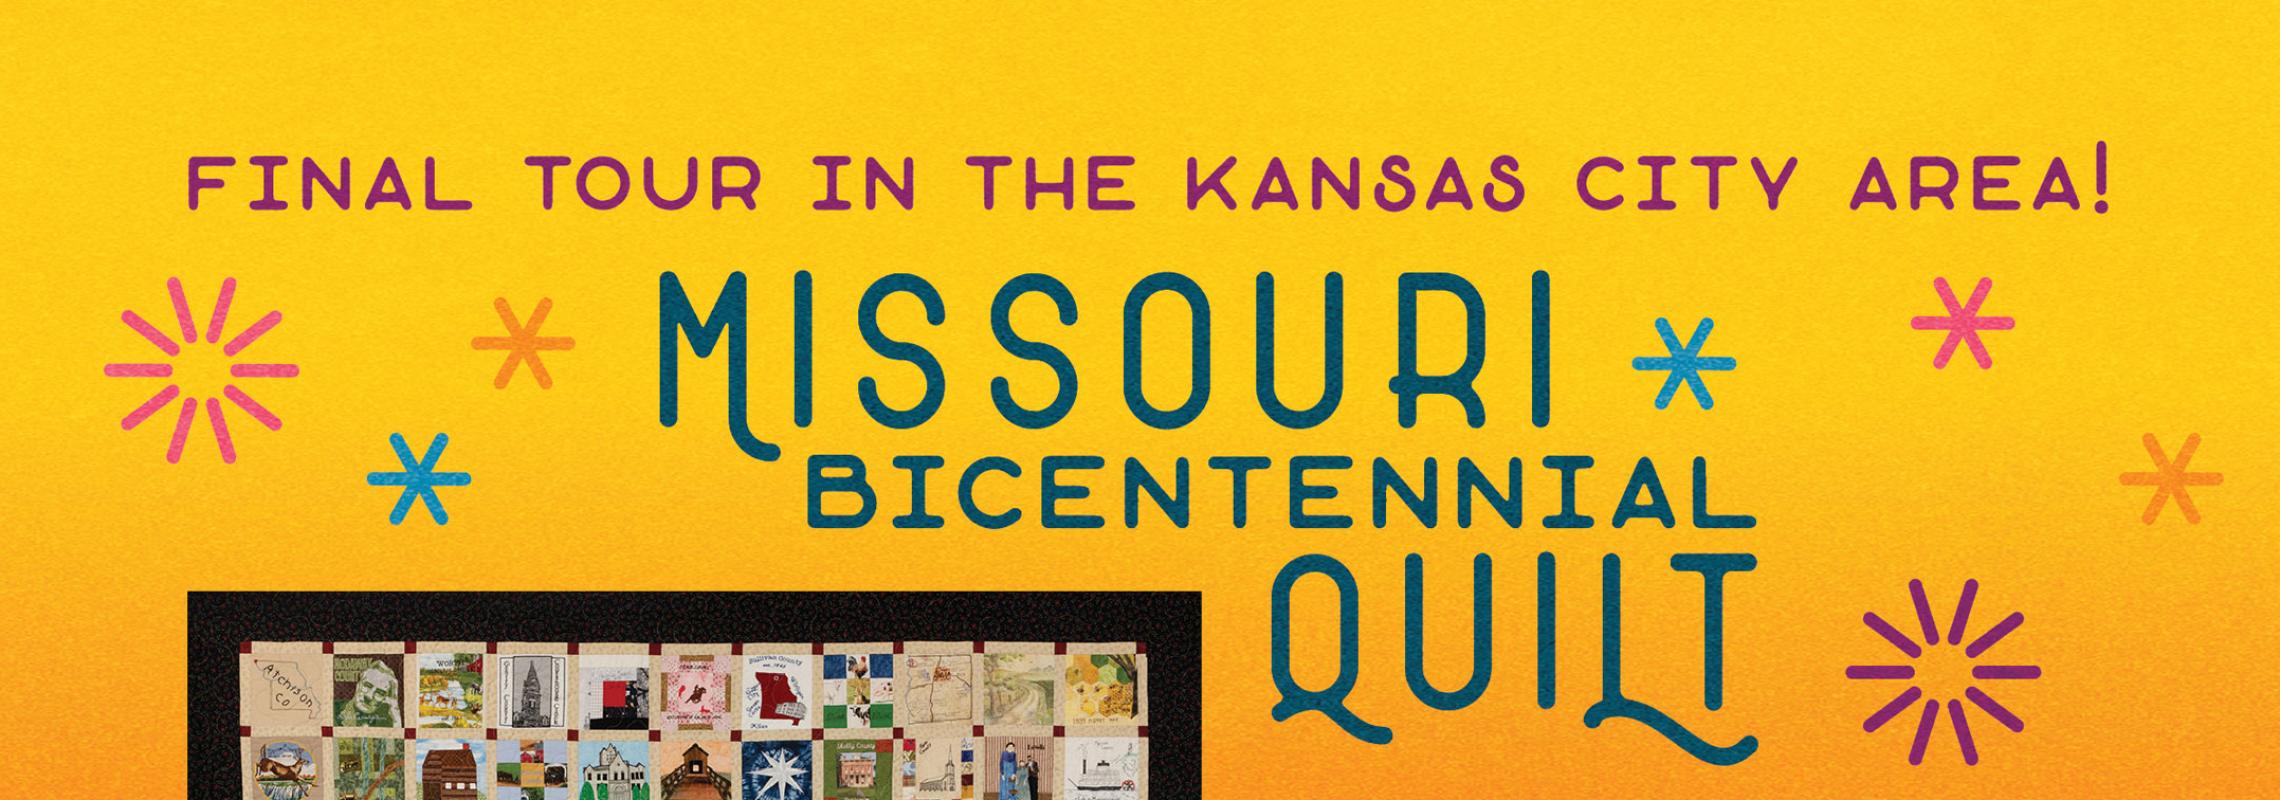 Missouri Bicentennial Quilt with info about reception and exhibit dates